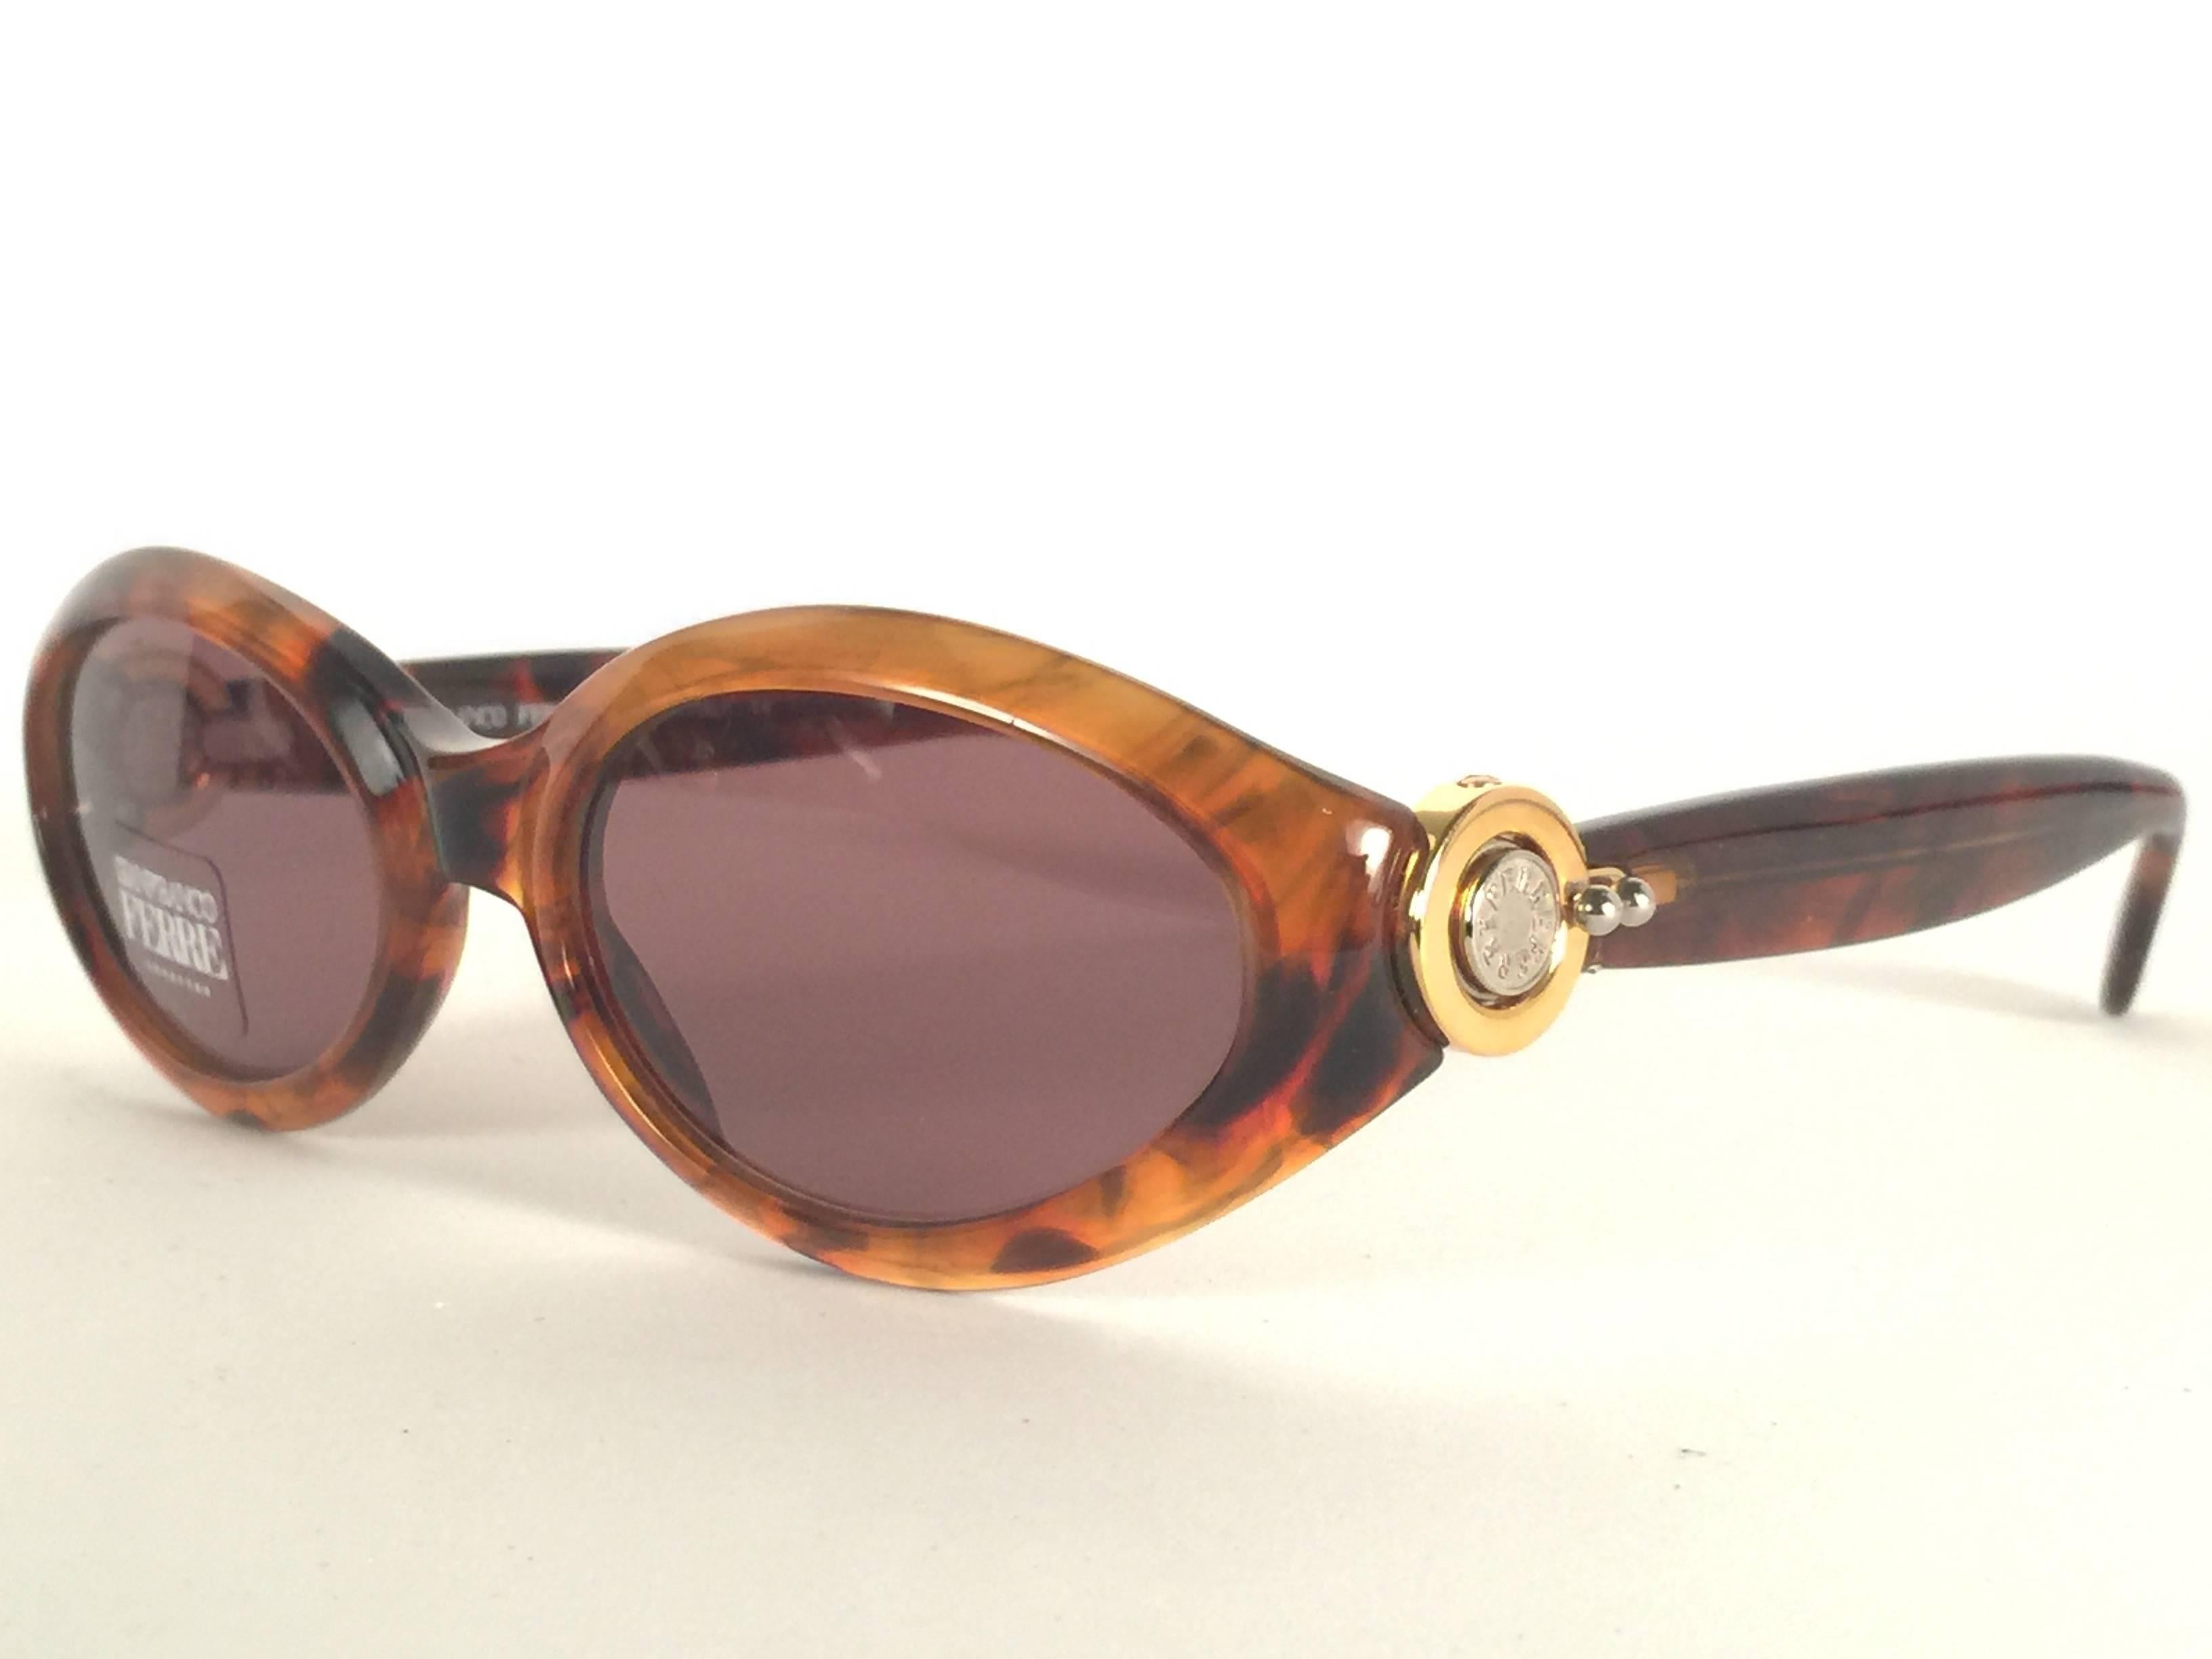 Black New Vintage Gianfranco Ferré Tortoise 1990's Made in Italy Sunglasses For Sale